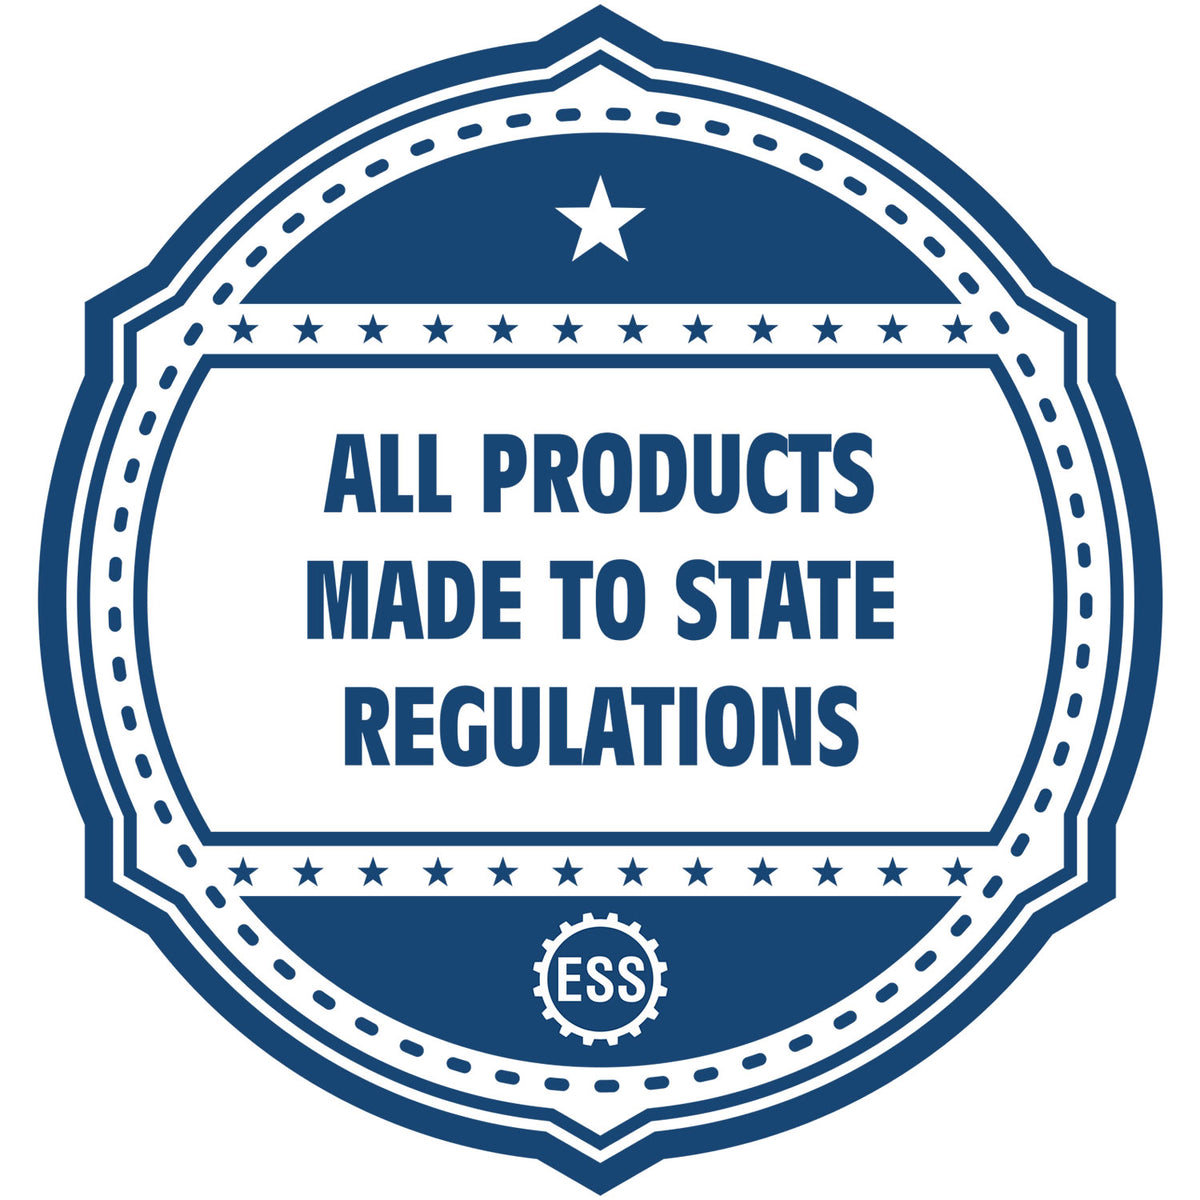 A blue icon or badge for the Oregon Professional Geologist Seal Stamp showing that this product is made in compliance with state regulations.